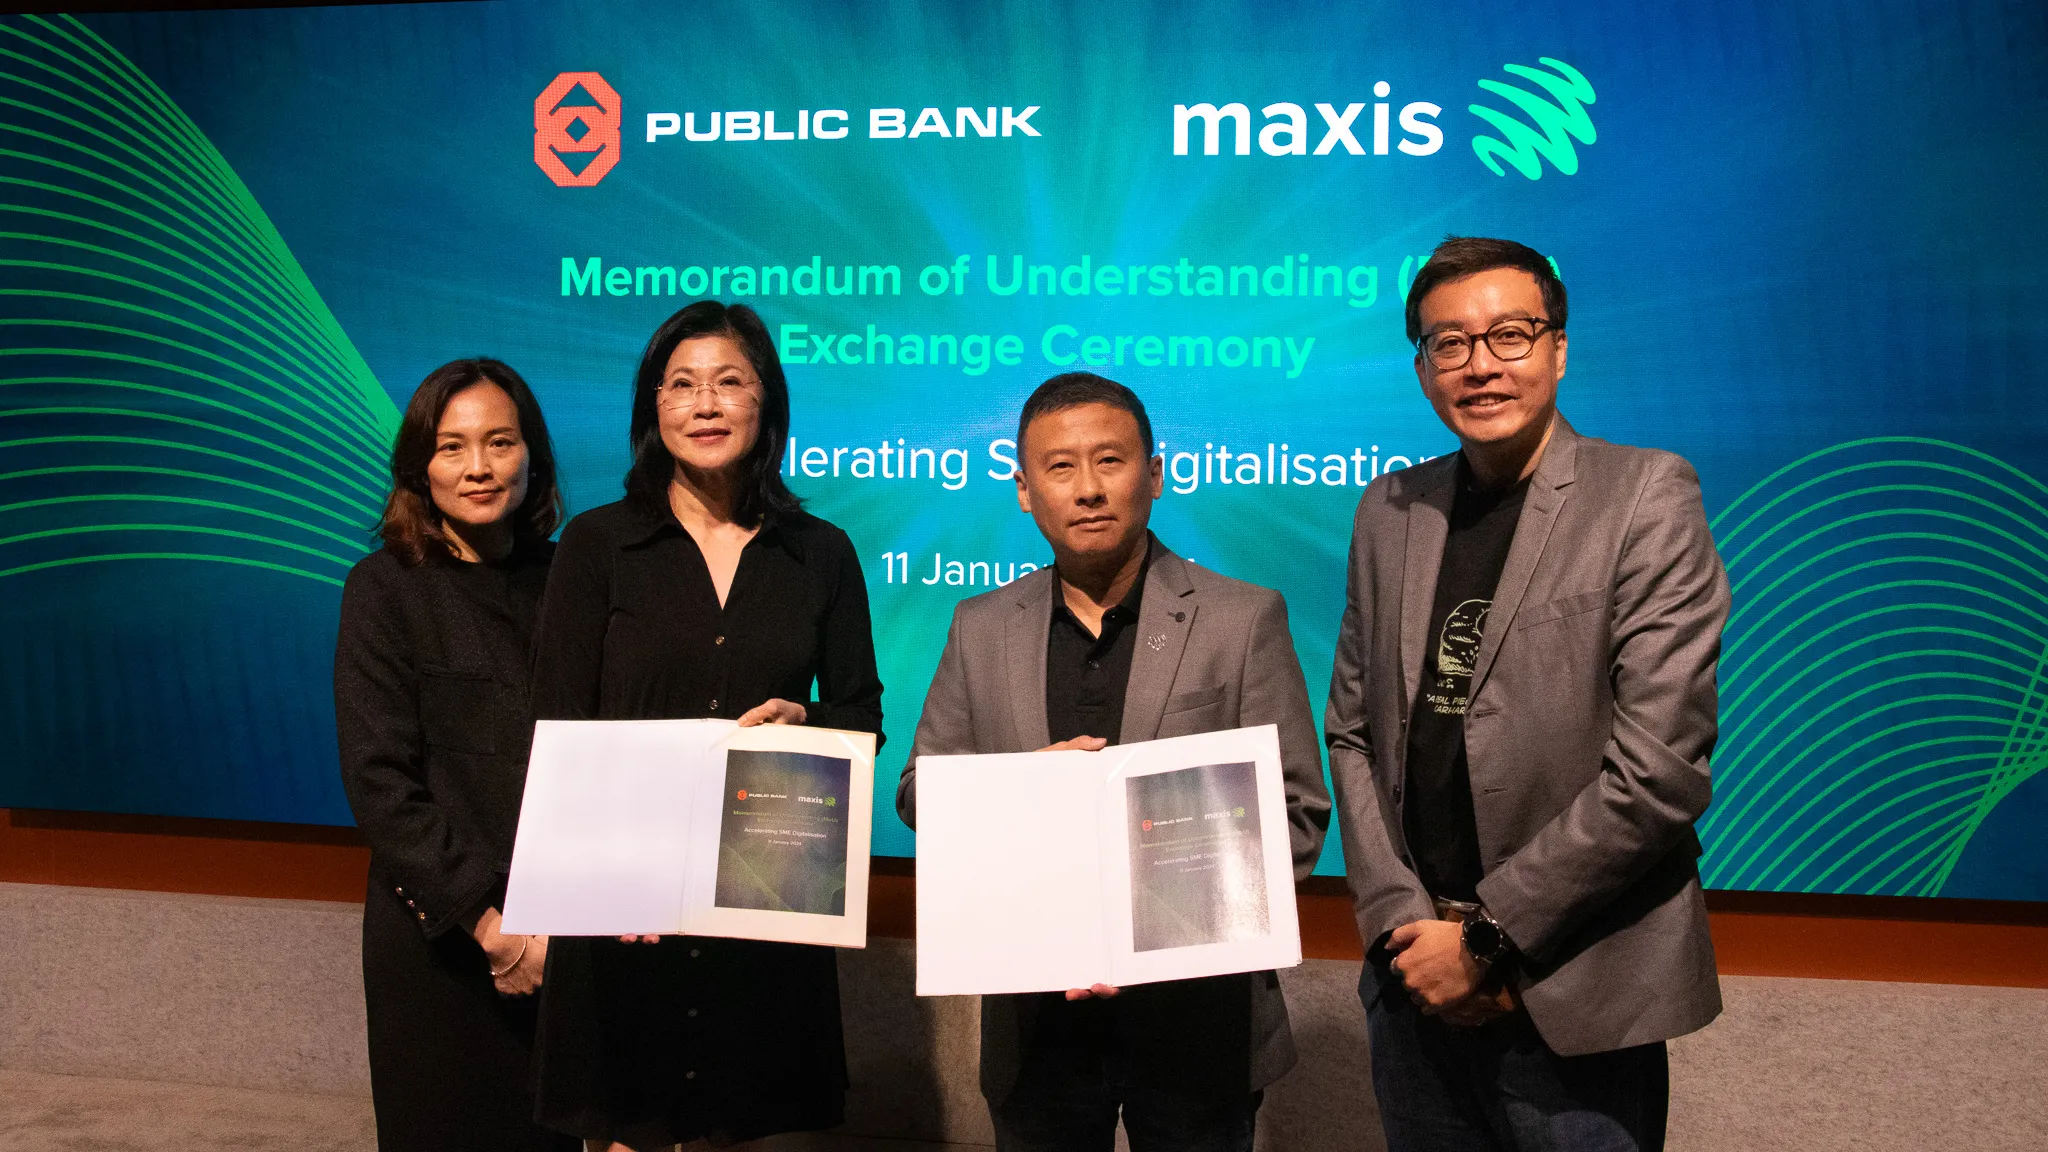 Maxis and Public Bank collaborate to further accelerate digital adoption among Malaysian SMEs